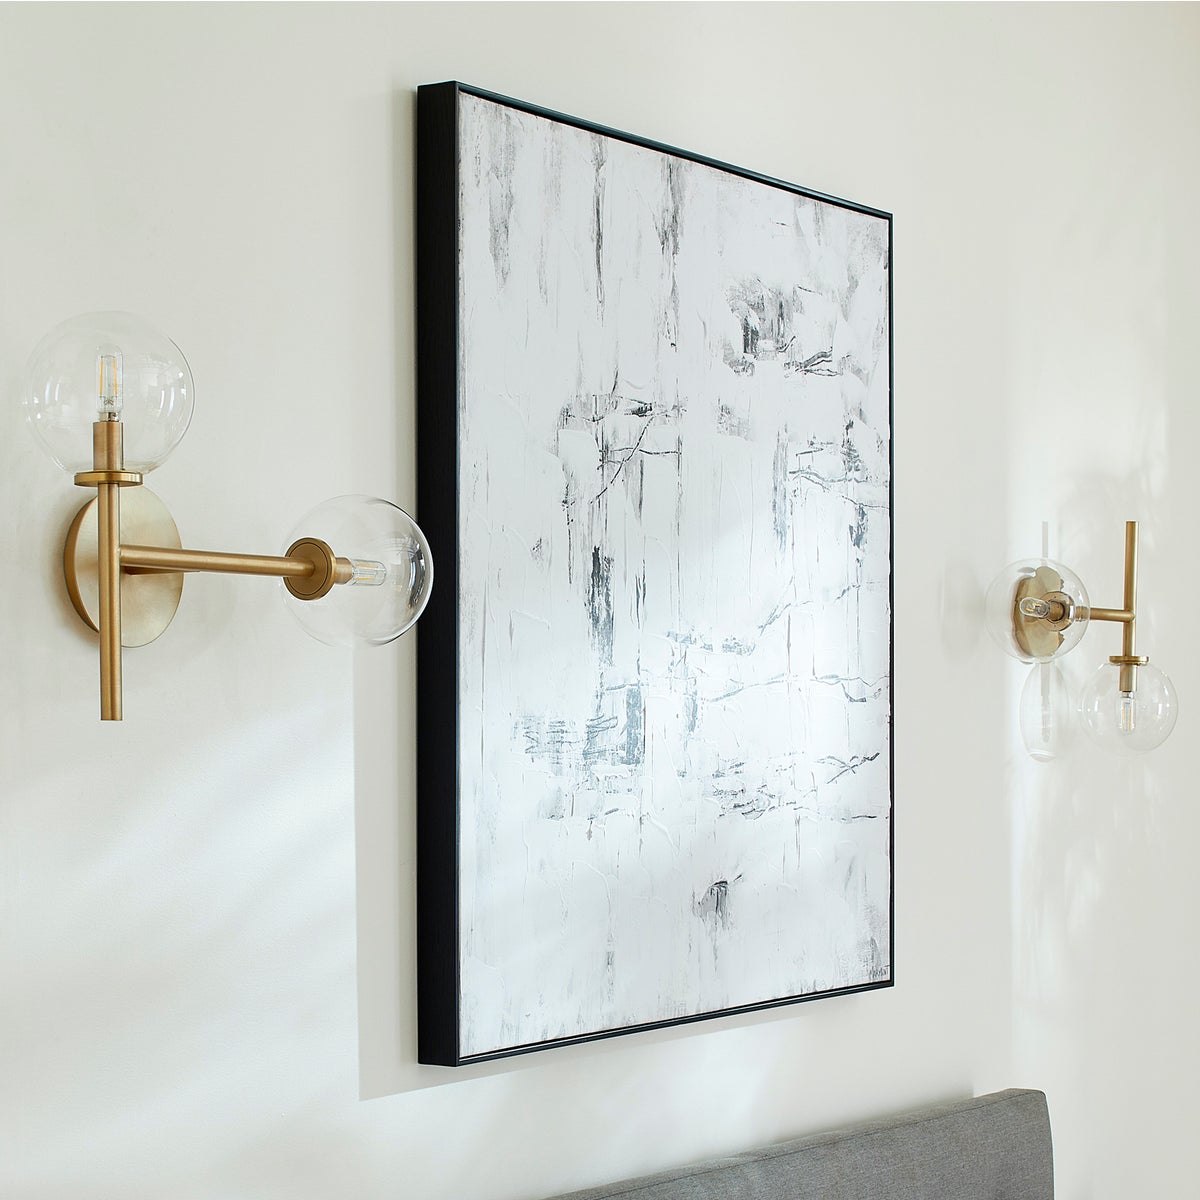 A mid-century modern Sputnik wall sconce with clear glass domes and aged brass frames. Enhance your space with this dramatic and charming lighting fixture from Quorum International.